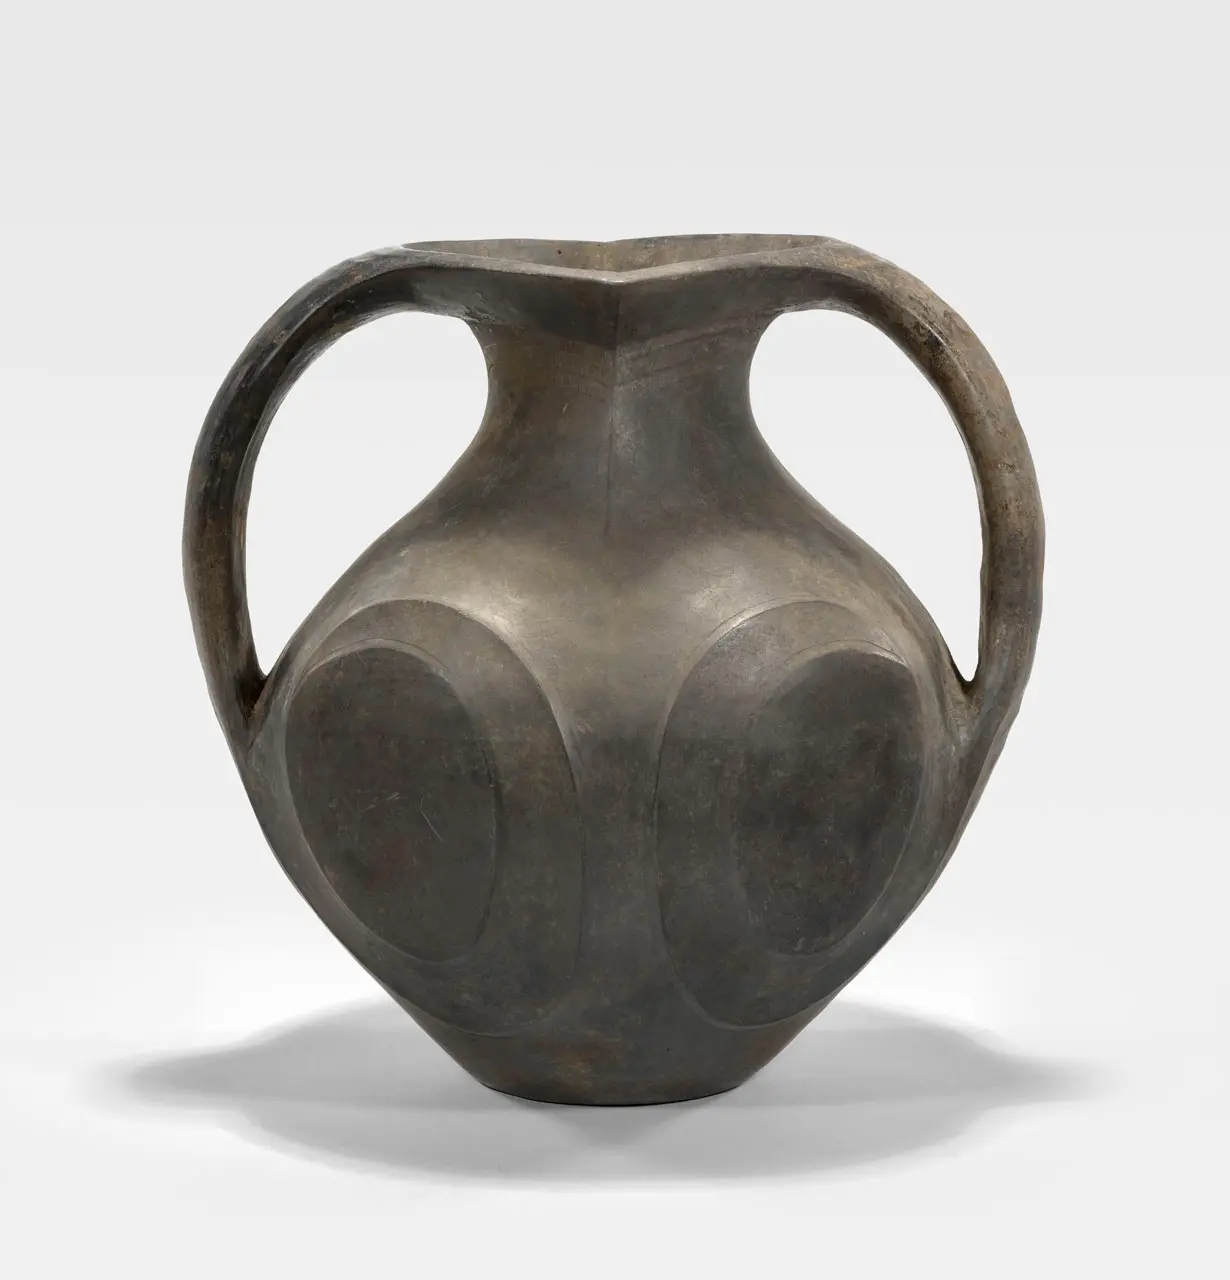 Chinese, Han dynasty (206 BCE–220 CE) Amphora with Two Handles, n.d. Earthenware, 13 x 12 3/4 x 11 in. Crocker Art Museum, gift of Gary Smith, 2021.90.1.